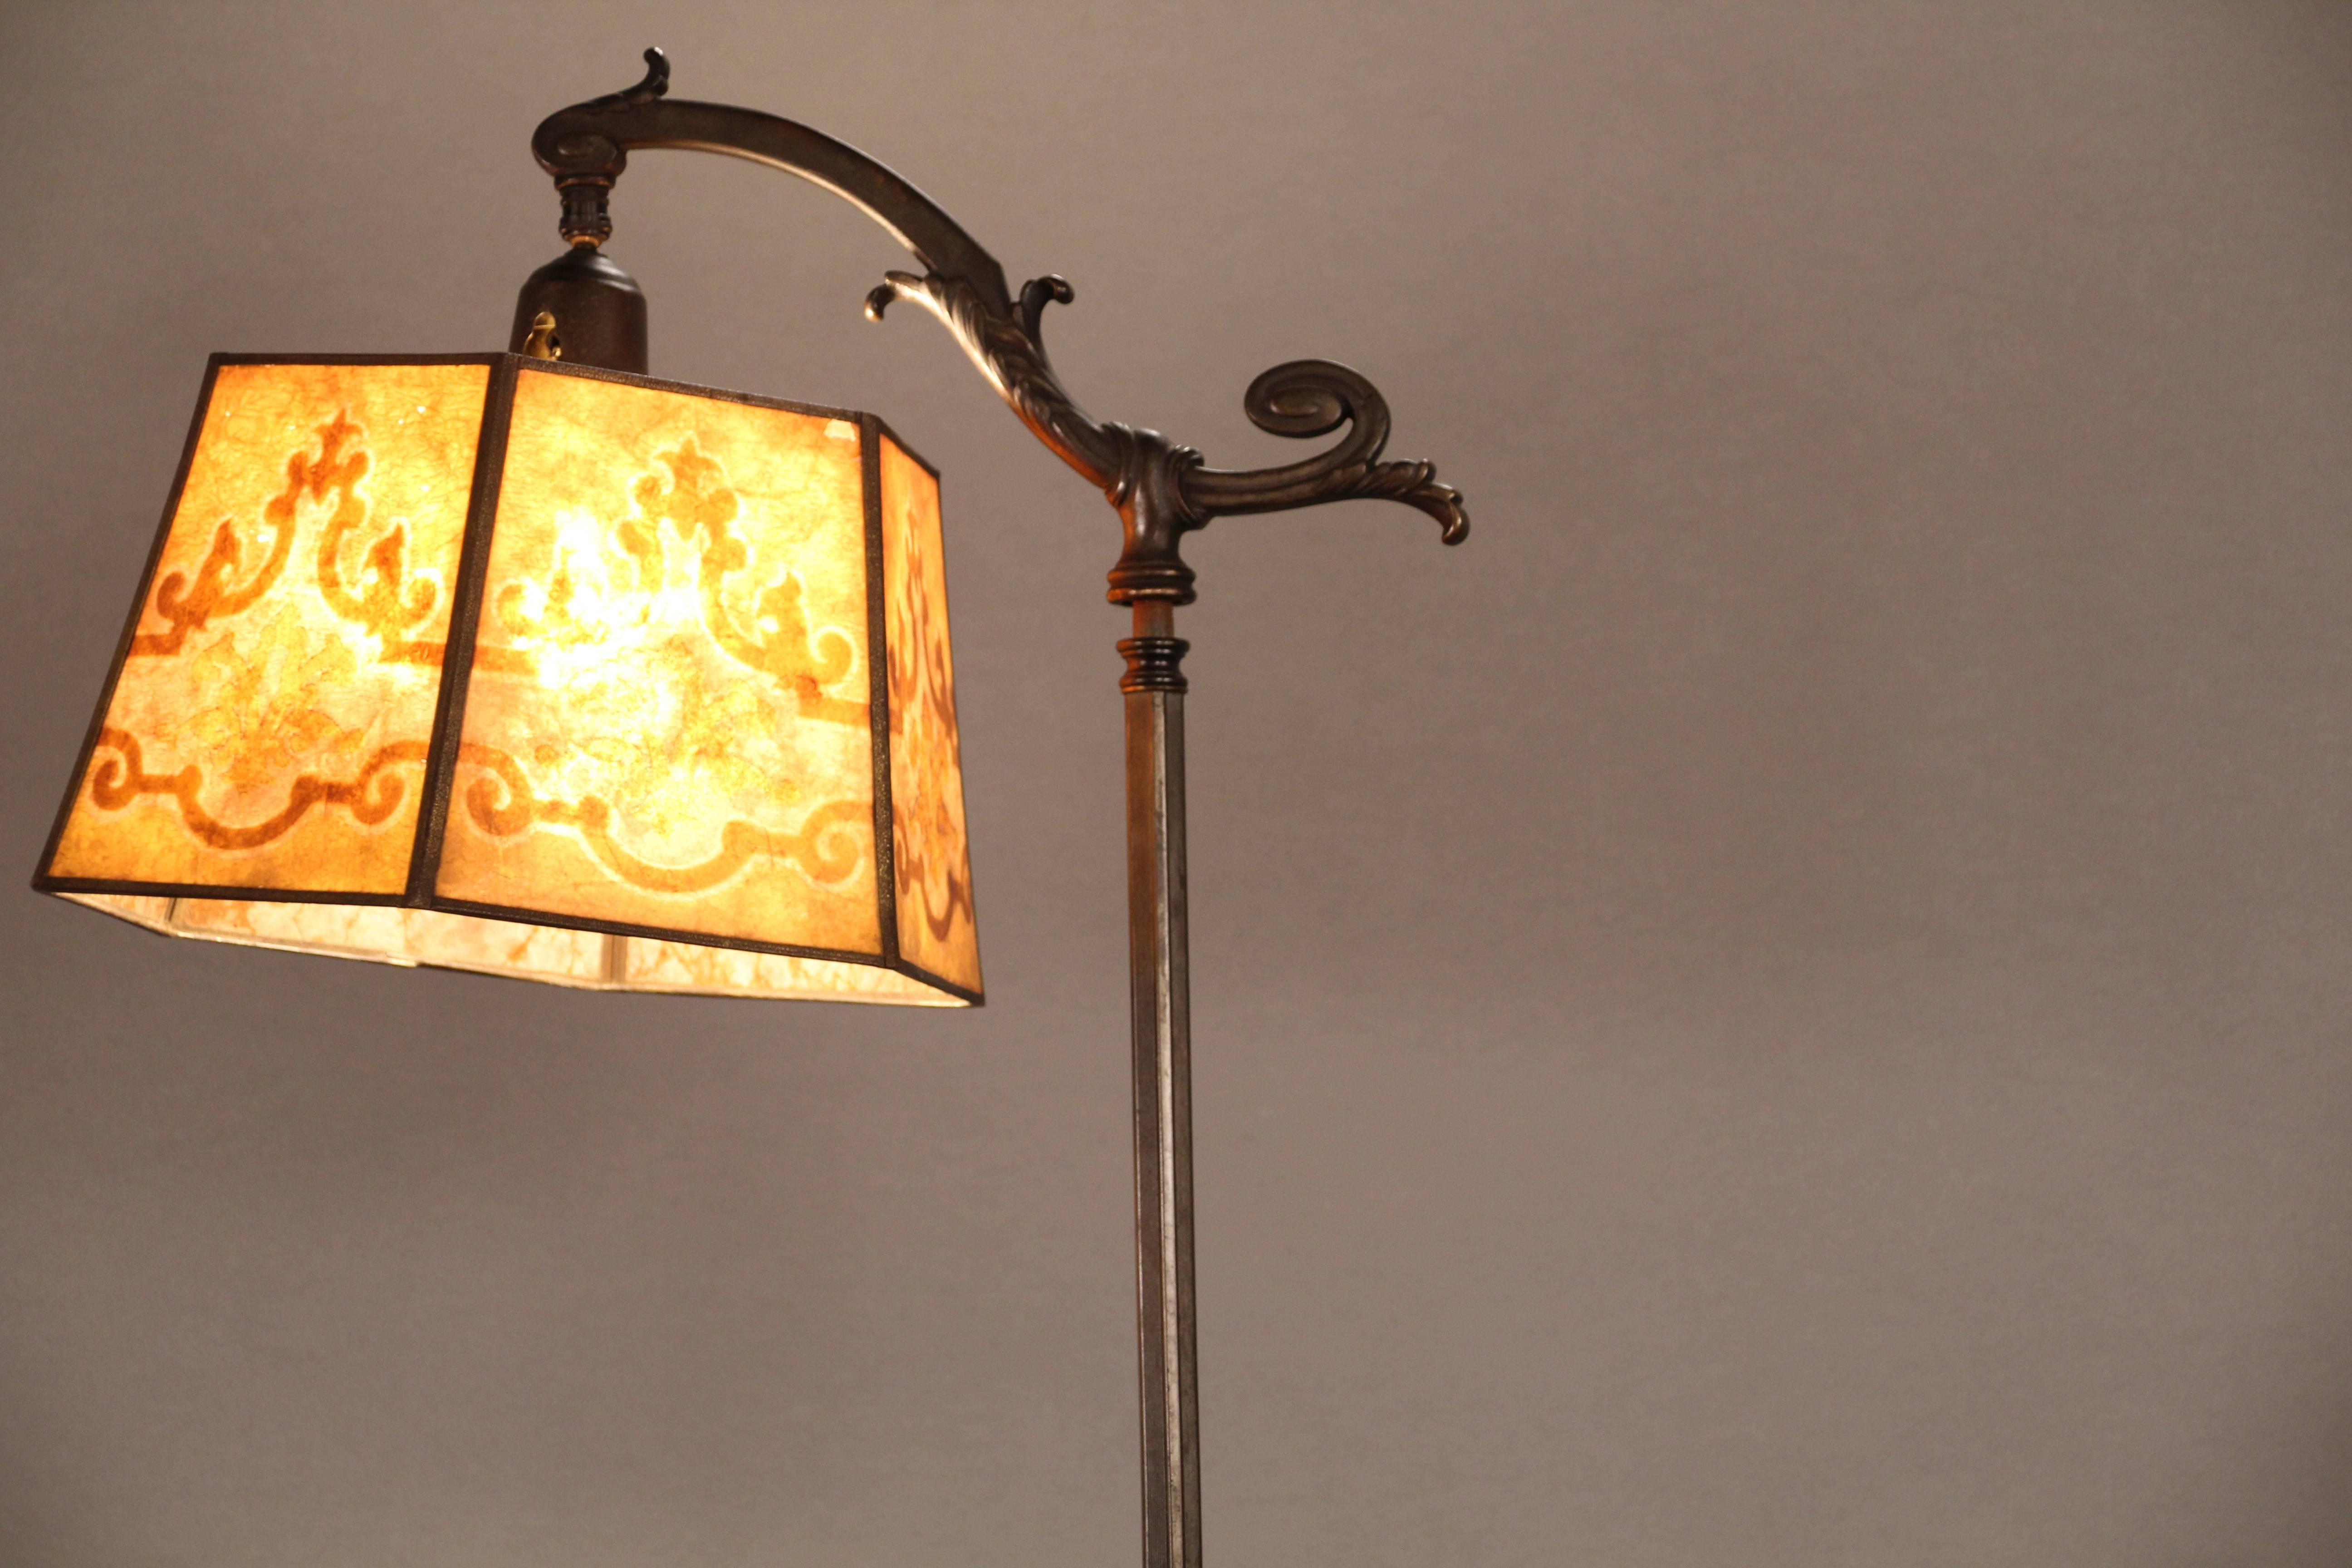 Early 20th Century 1920s Spanish Revival Bridge Lamp with Mica Shade